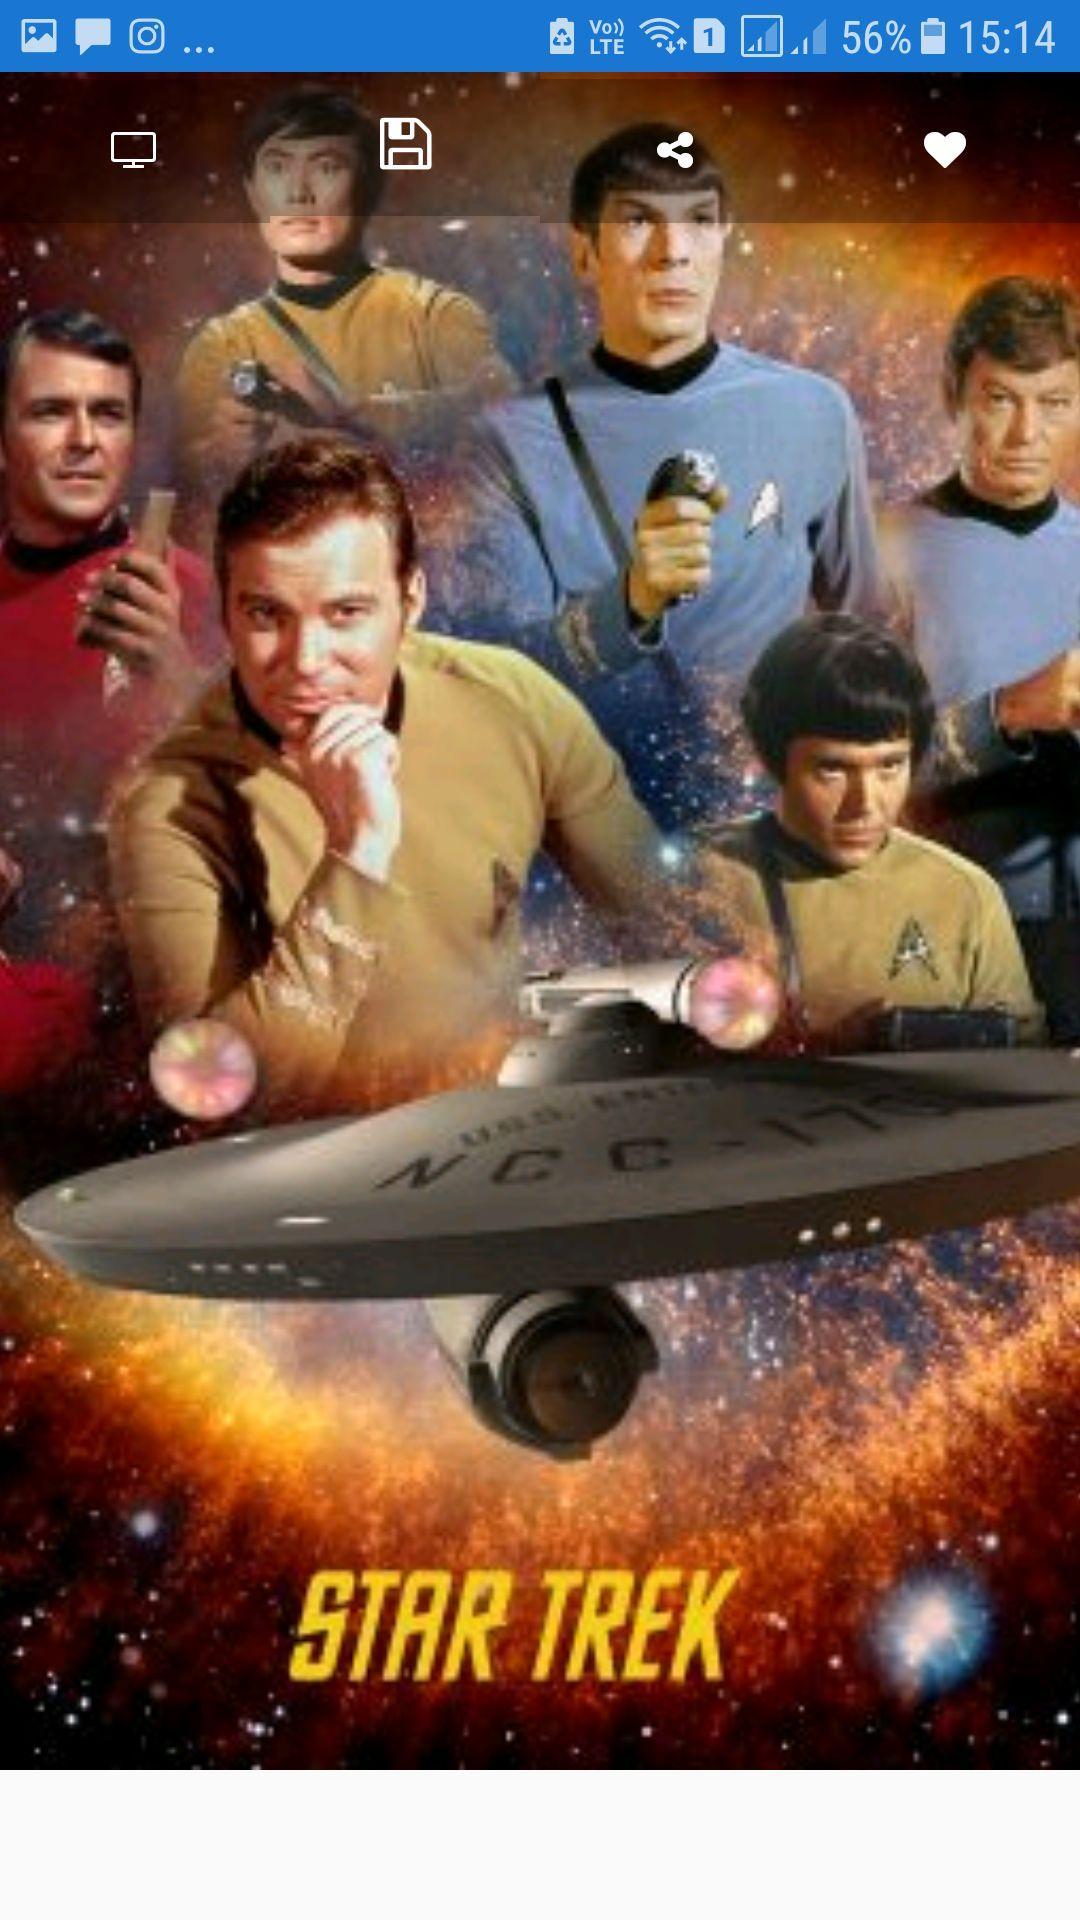 Star Trek Wallpapers Hd For Android Apk Download